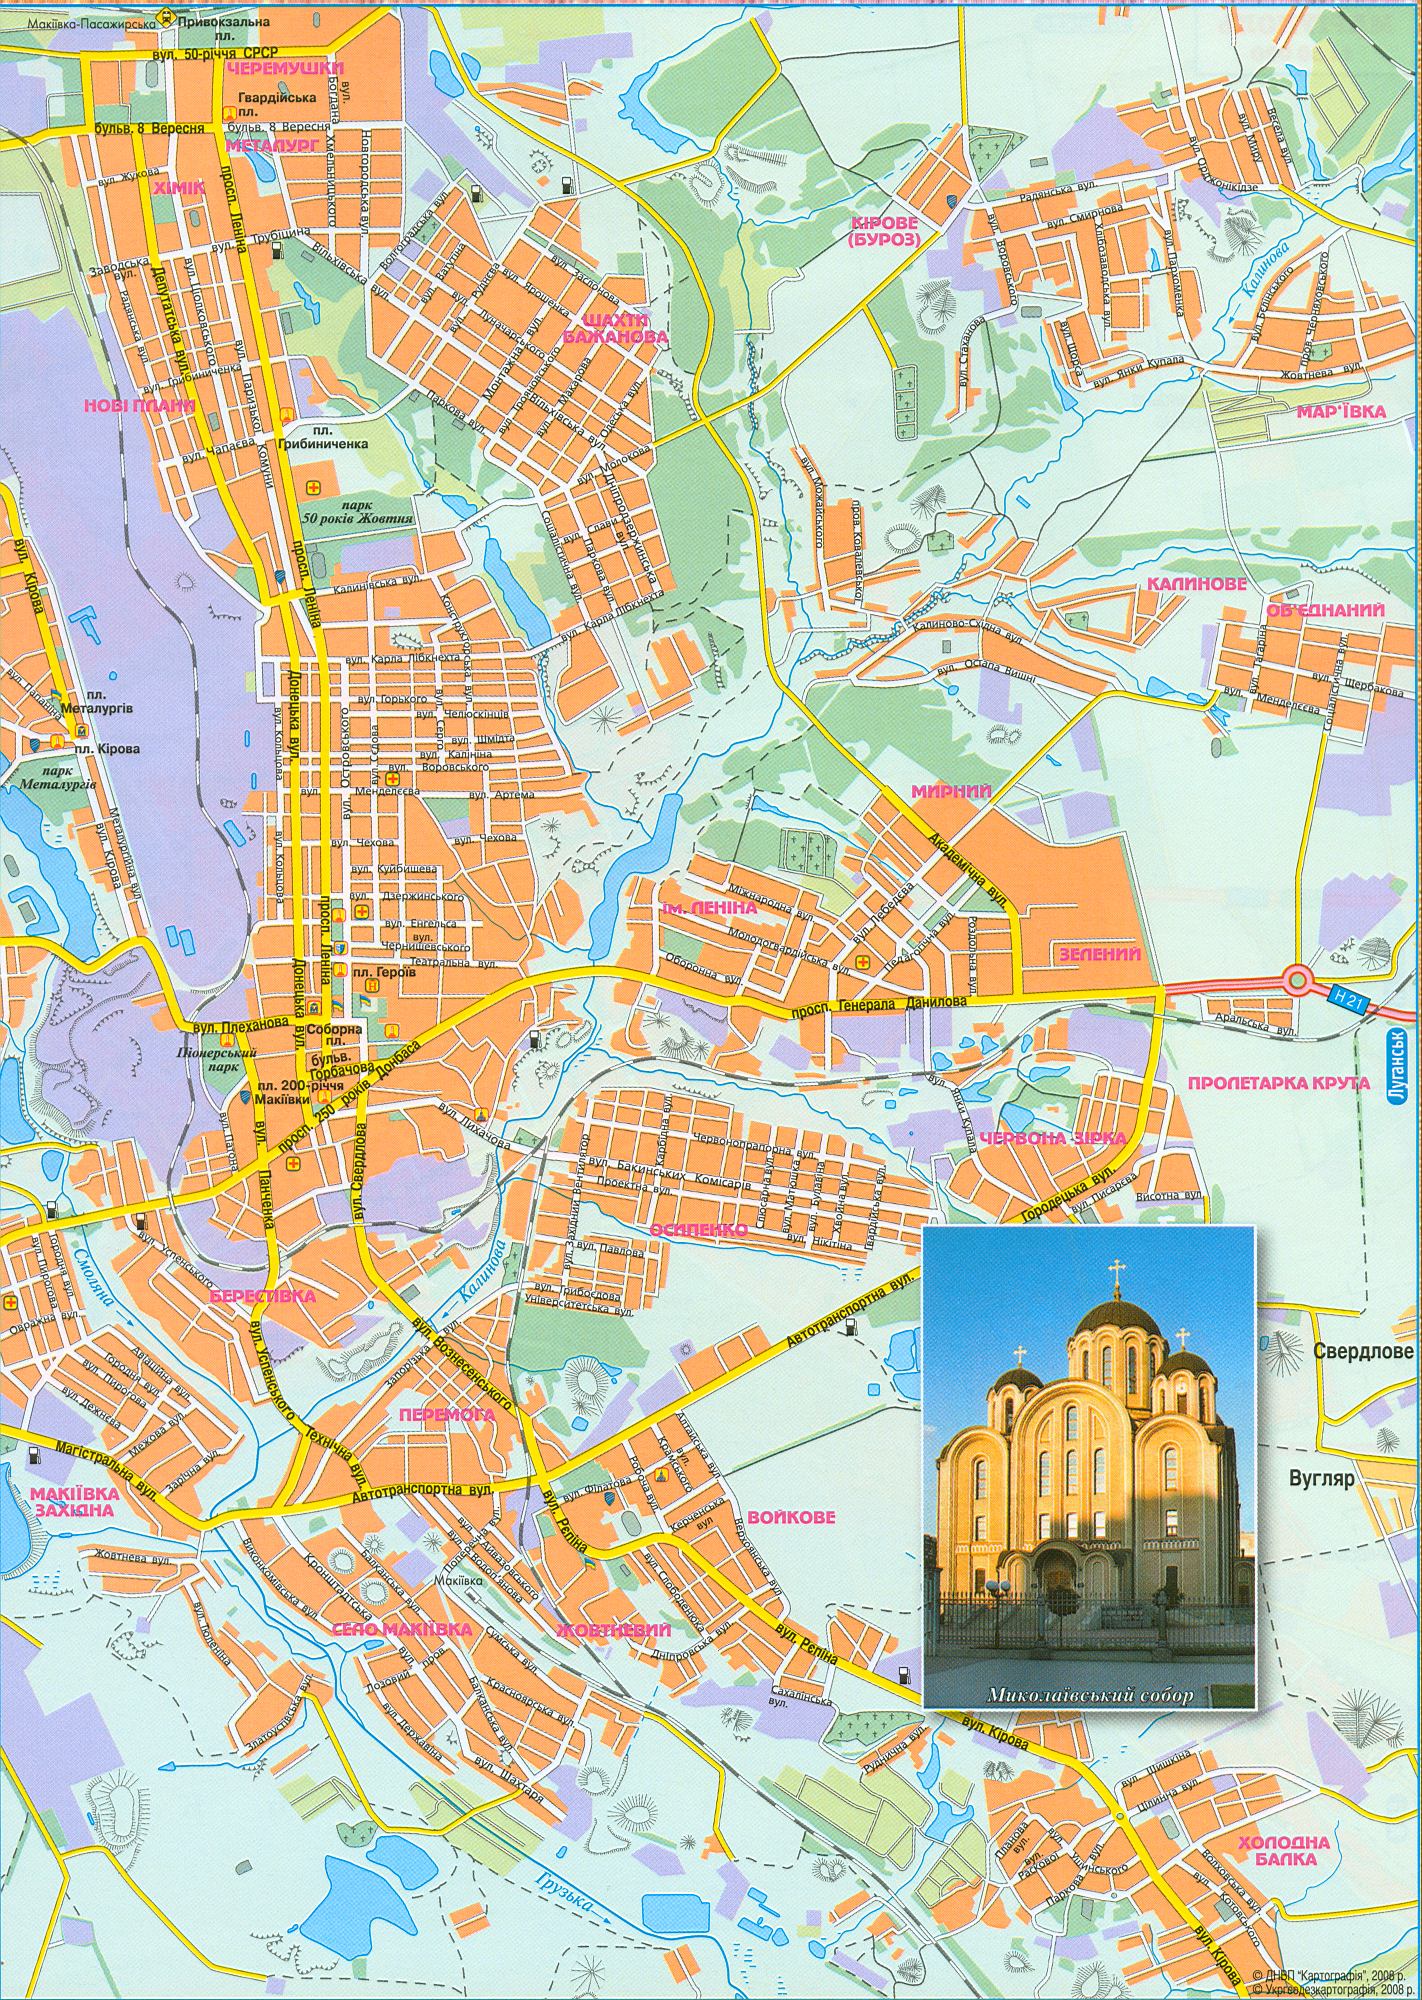 Map of Makeevka updated in 2008 includes part of Donetsk, scale 1cm: 500m. Free Download, B0